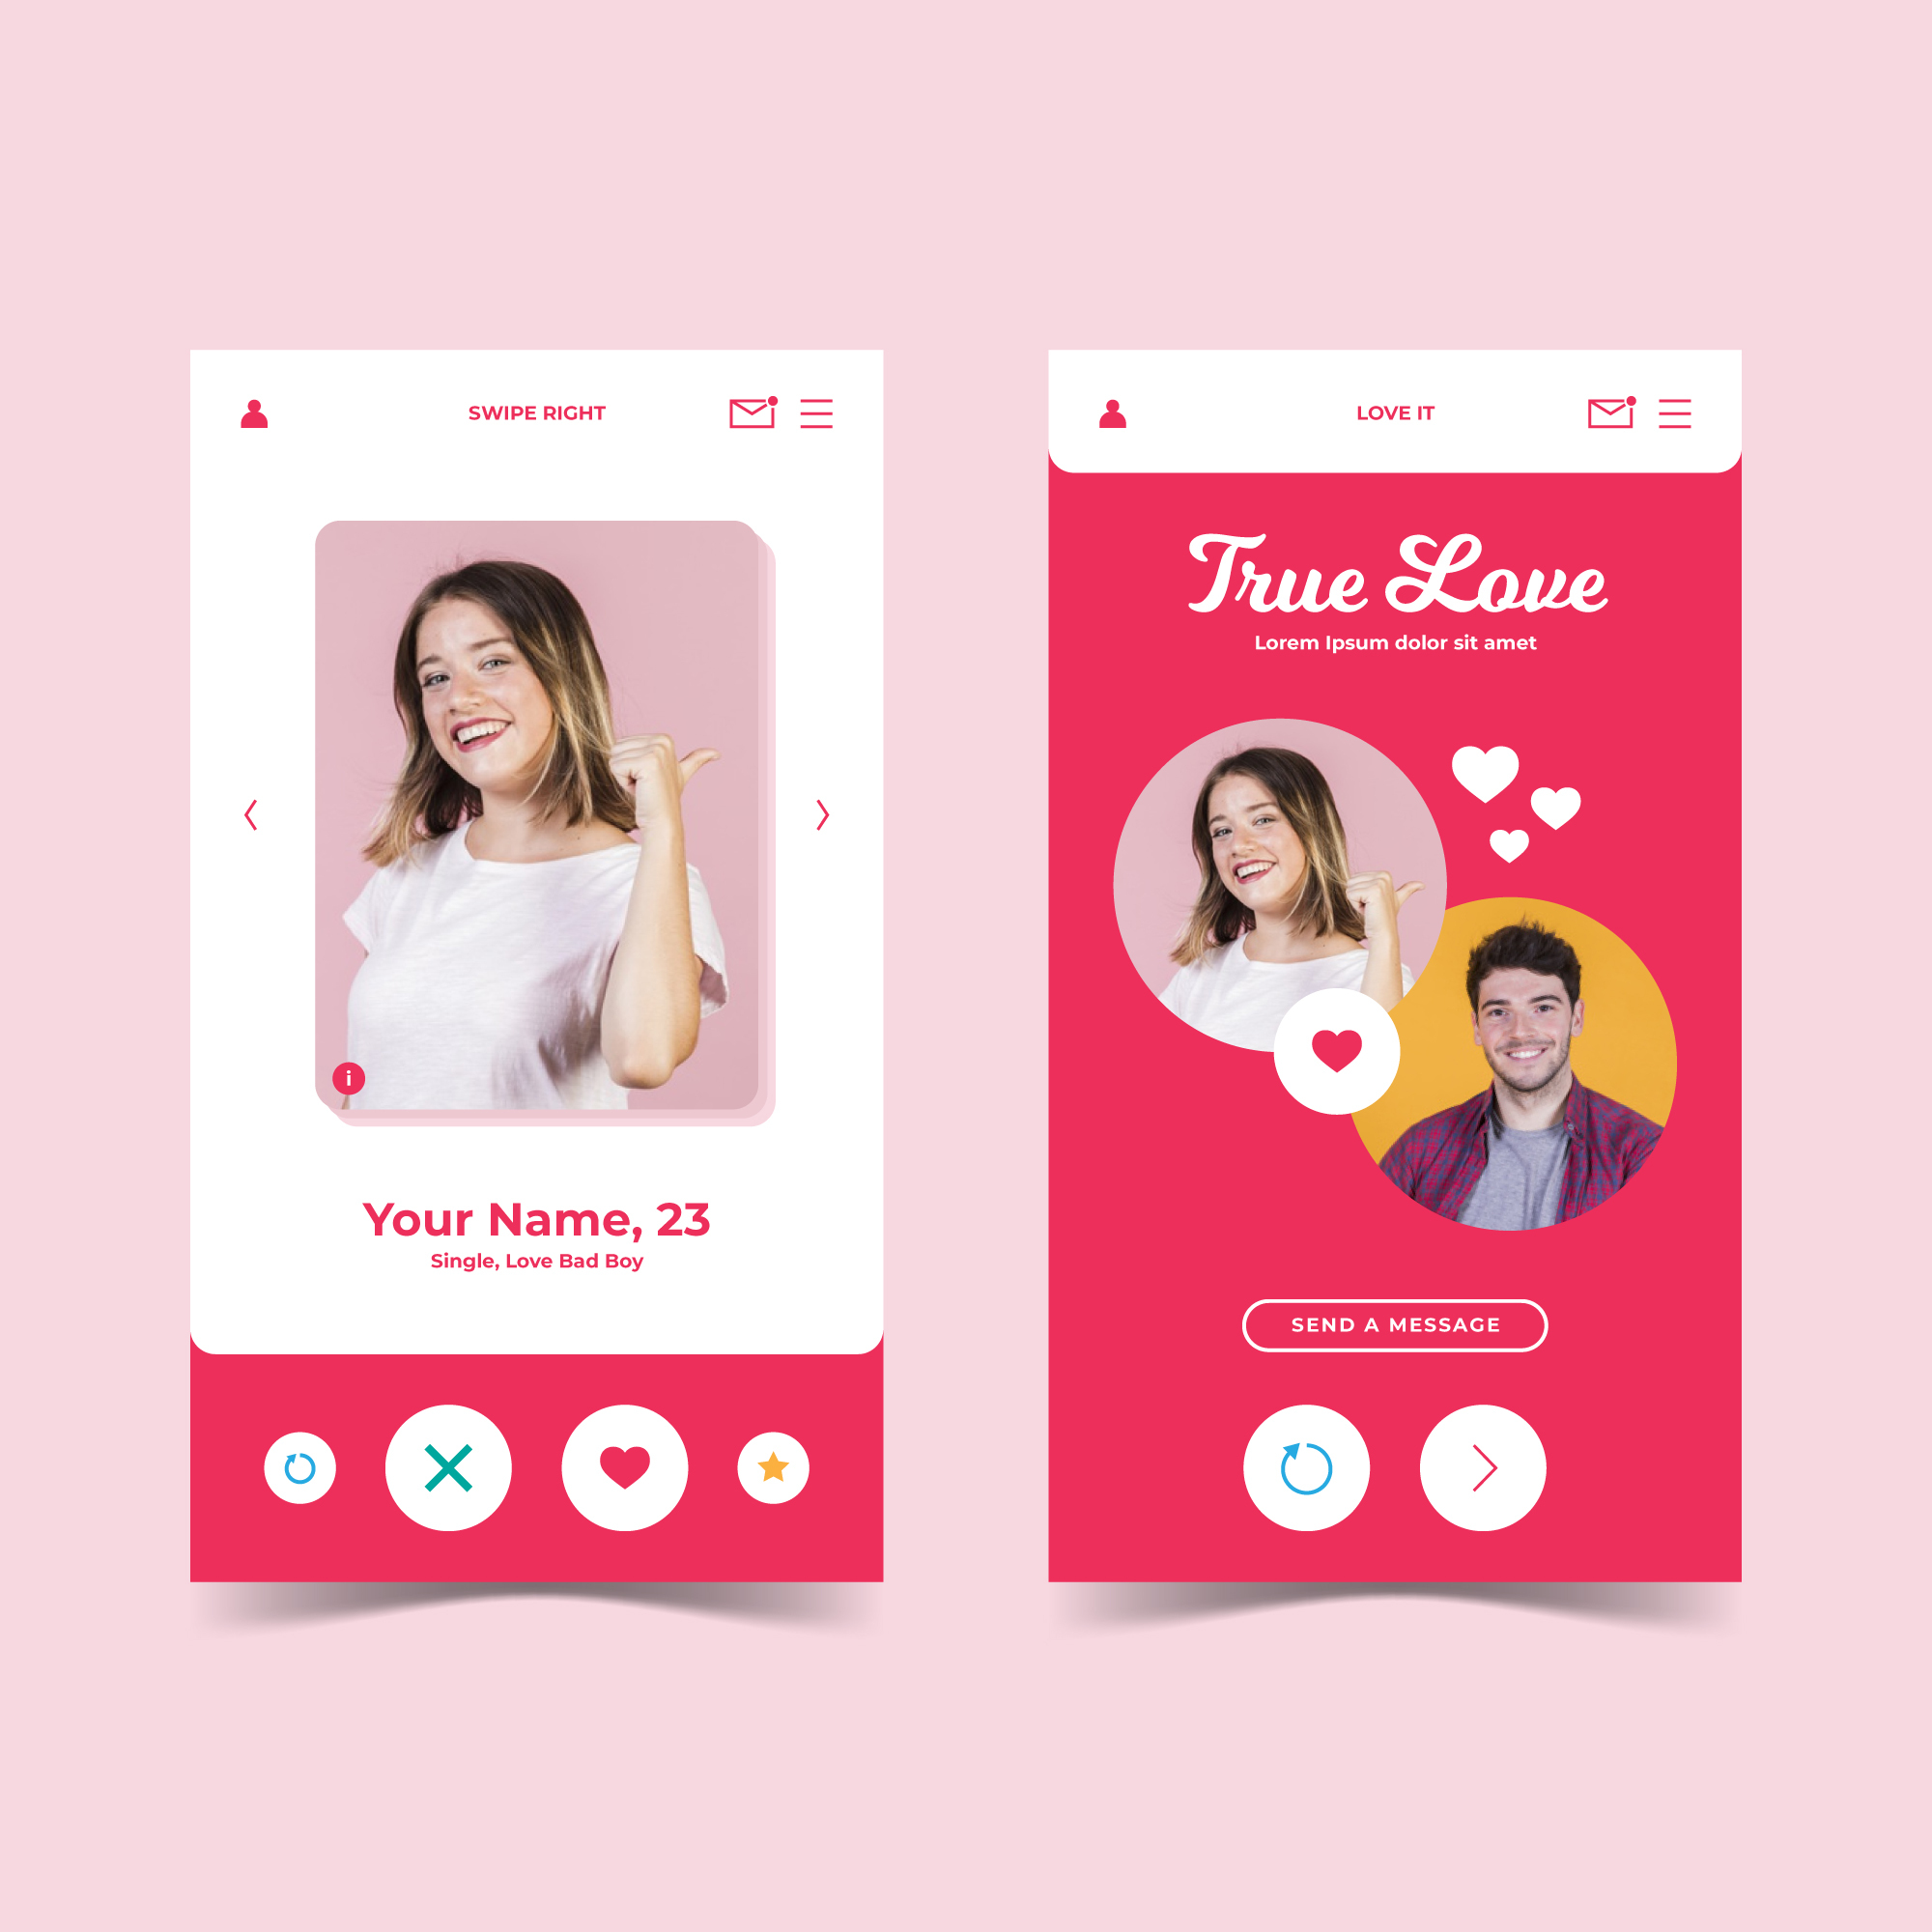 A couple matching on a dating app | Source: Freepik